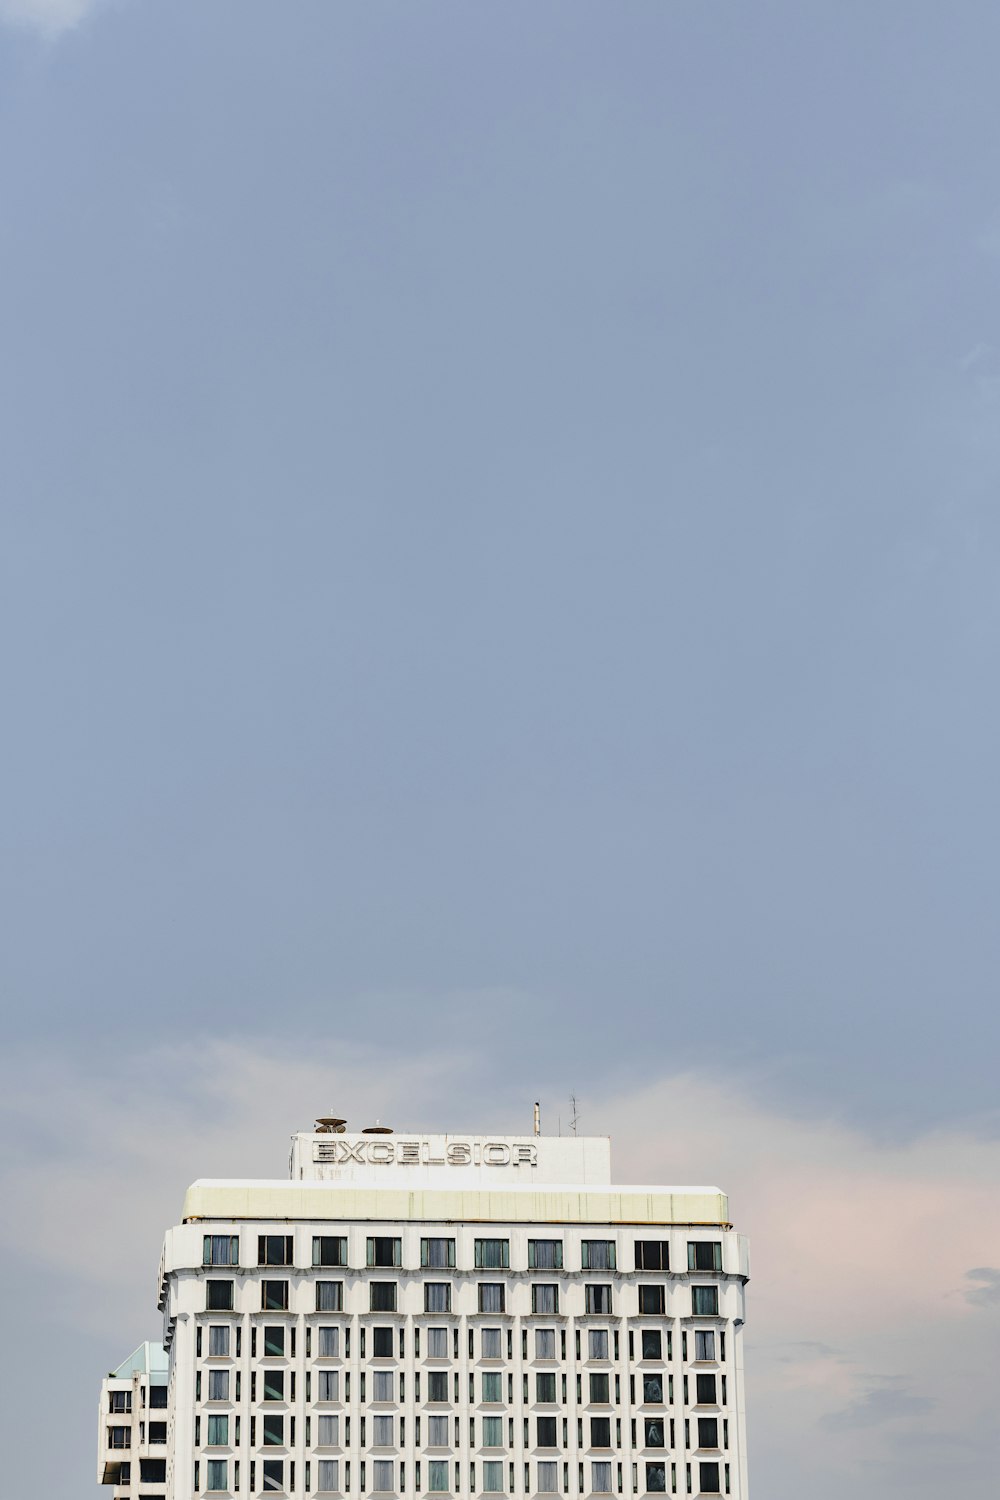 a plane flying over a large white building